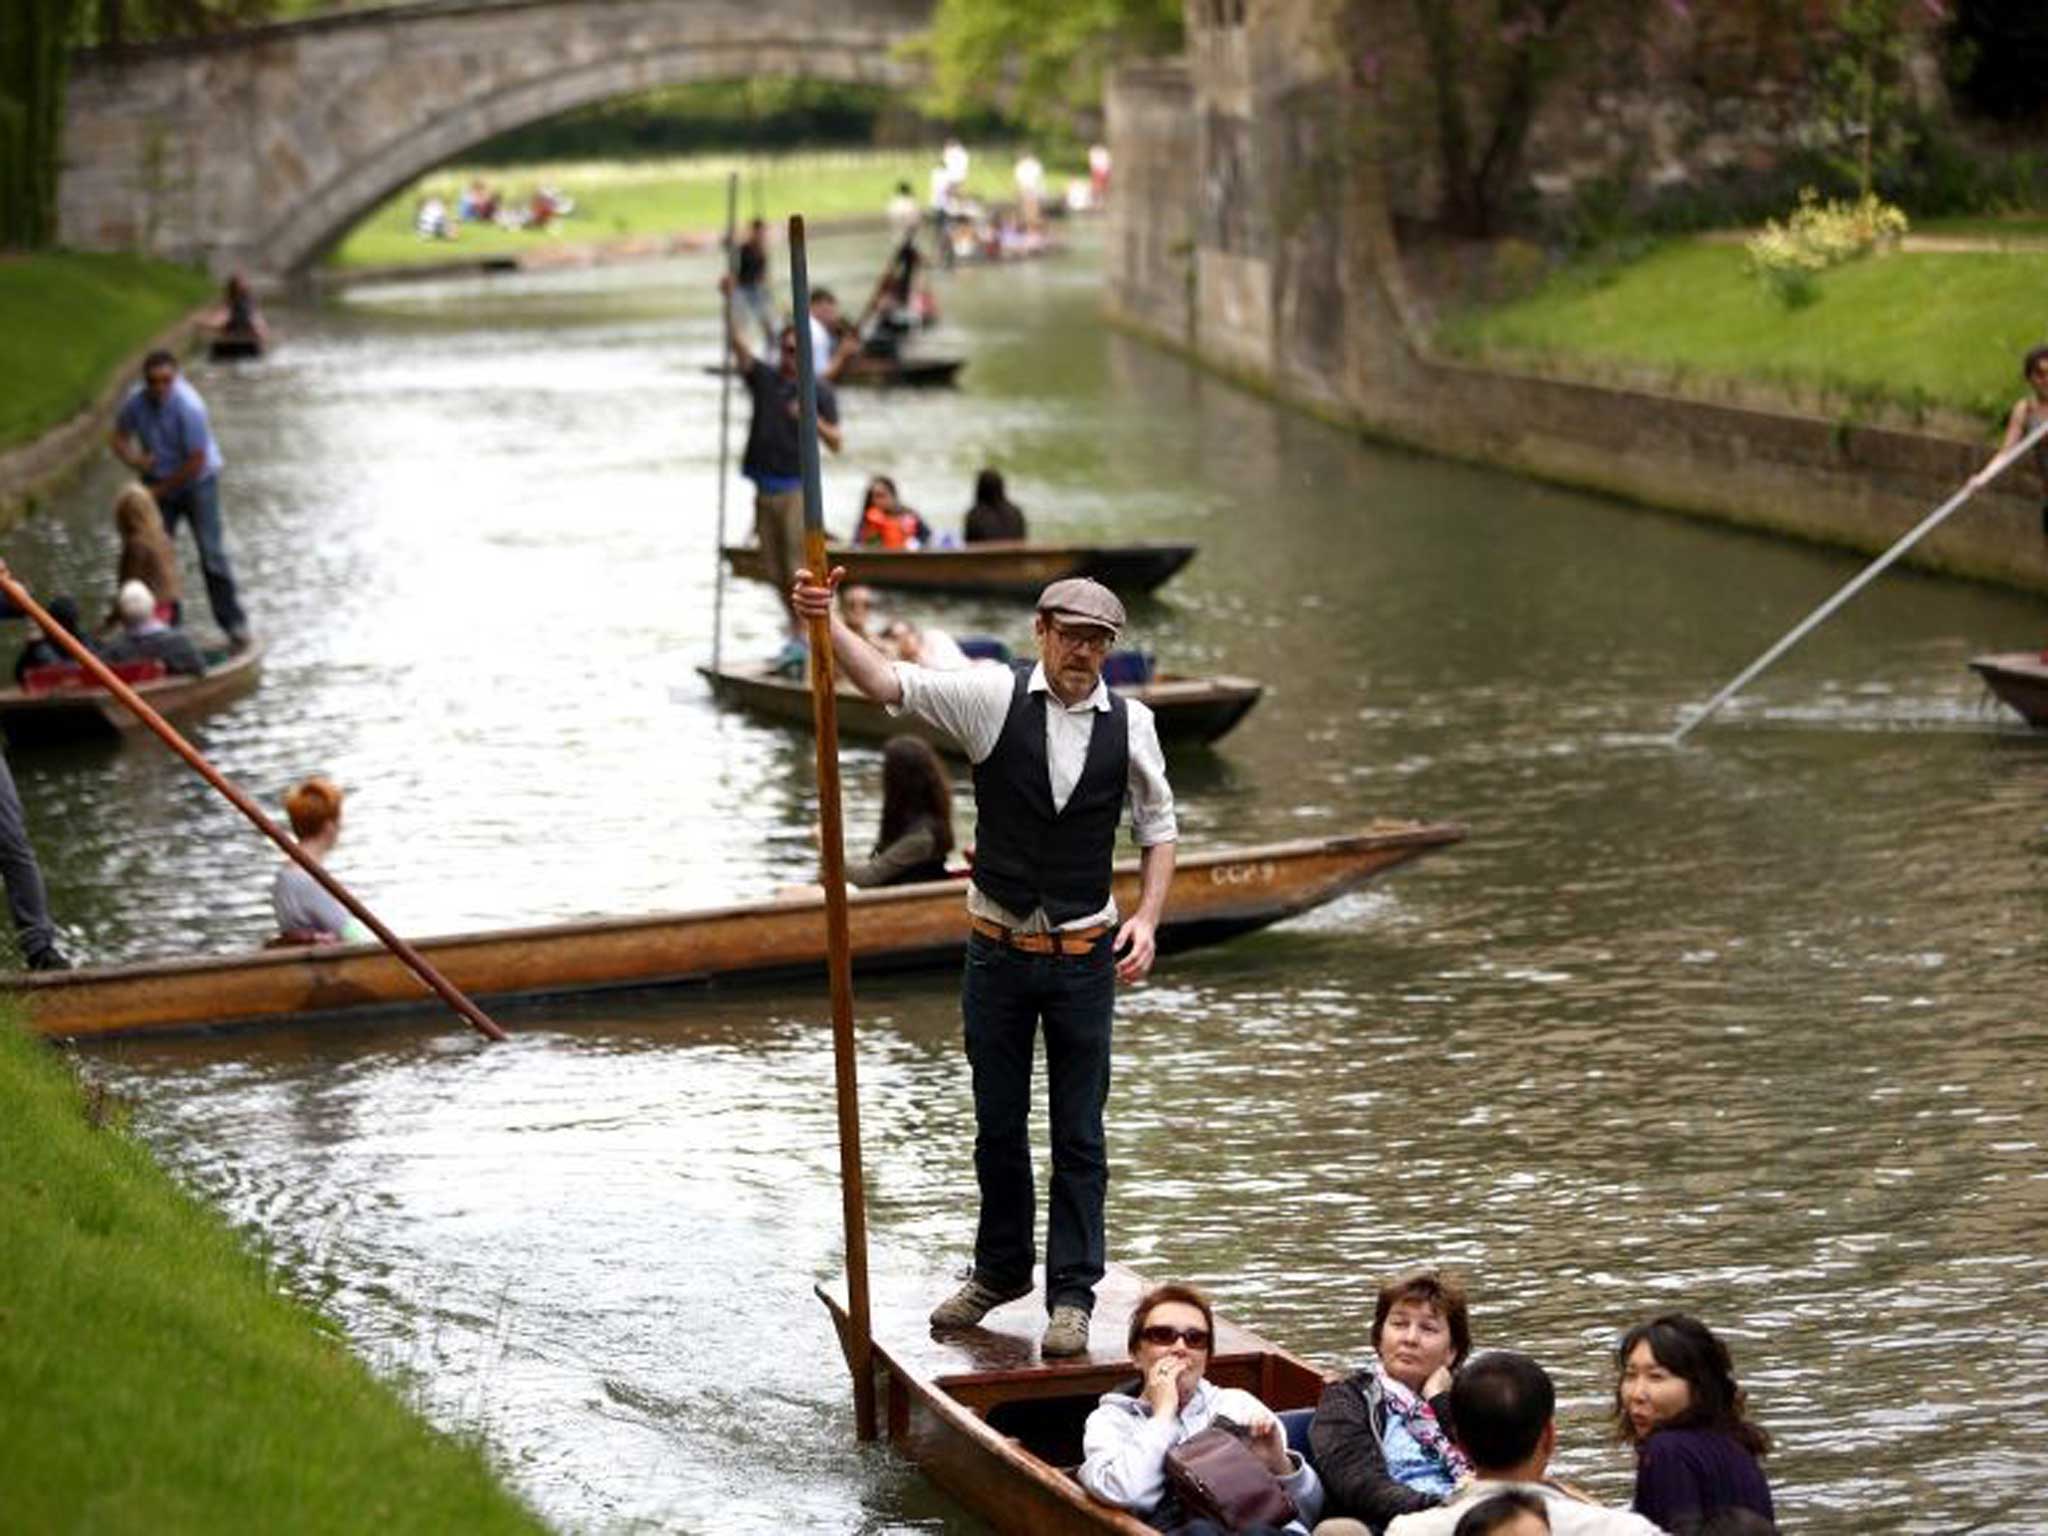 Oxbridge punt: Students want value for money and job prospects rather than lazy, hazy days